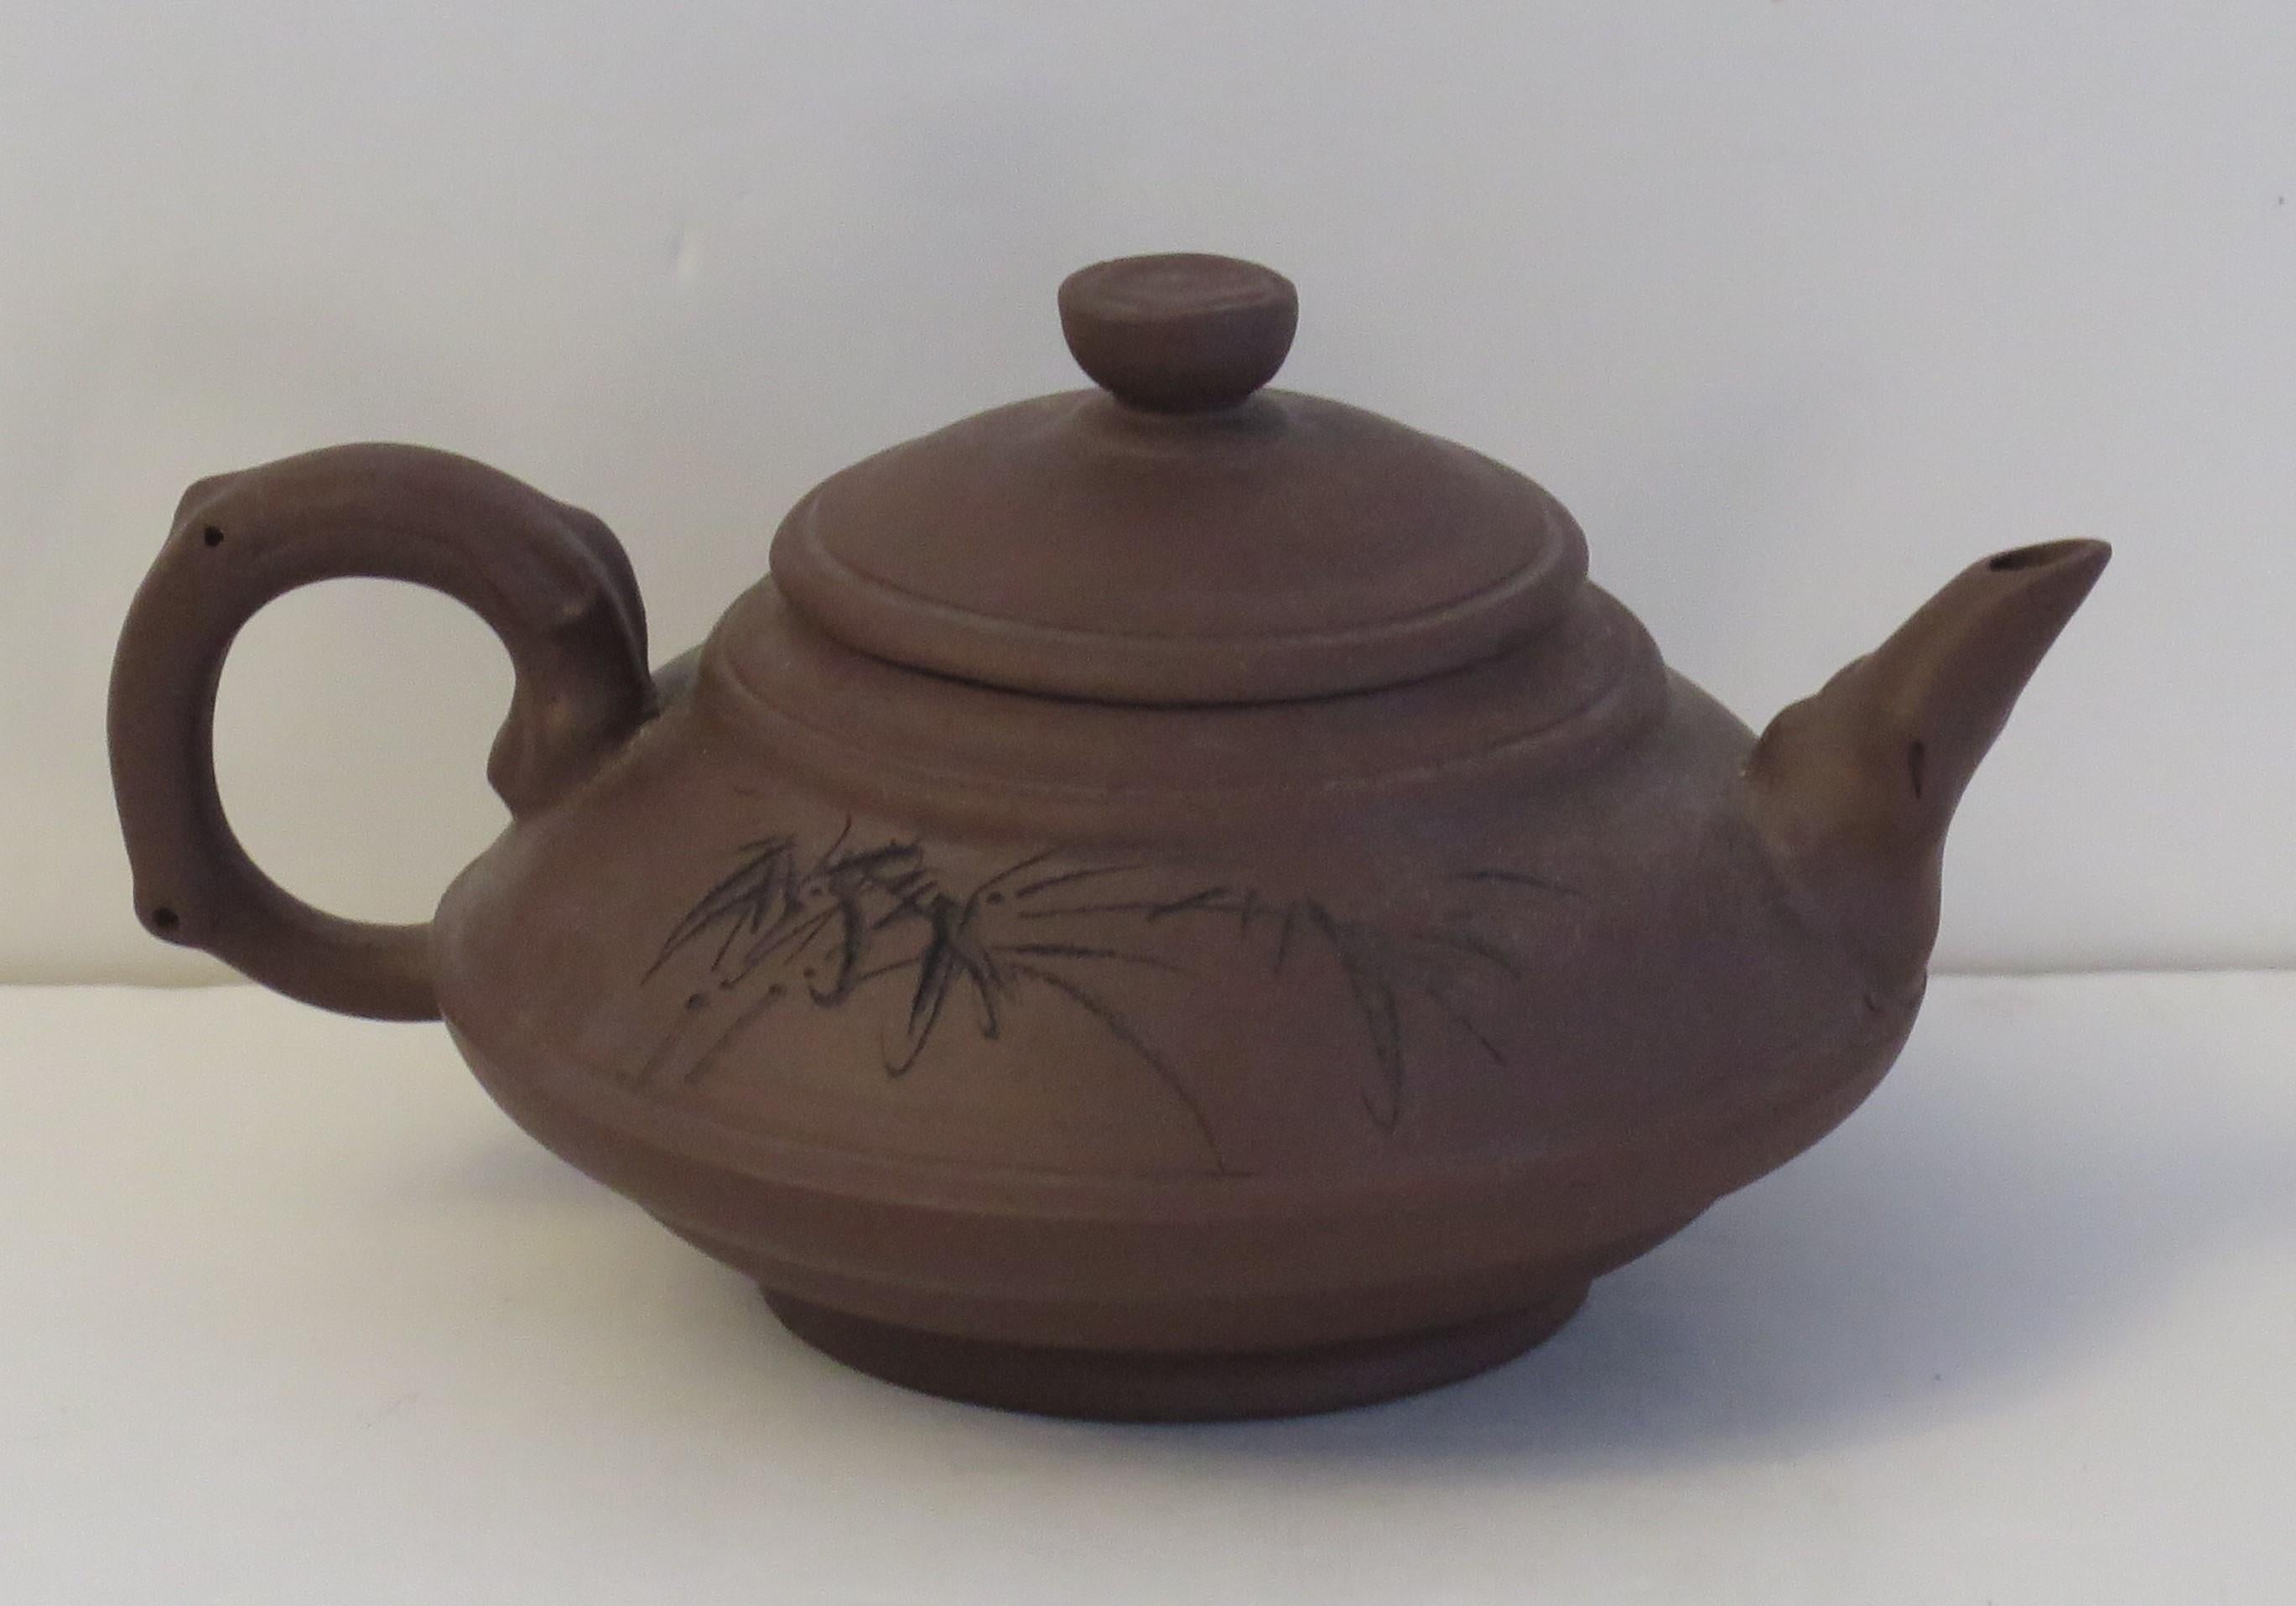 This is a Chinese handcrafted Red Clay Yixing teapot and cover, which we date to the 20th century, circa 1930.

The Teapot and lid are handcrafted in an interesting shape and made of Red Clay stoneware. The teapot is inscribed on the upper body